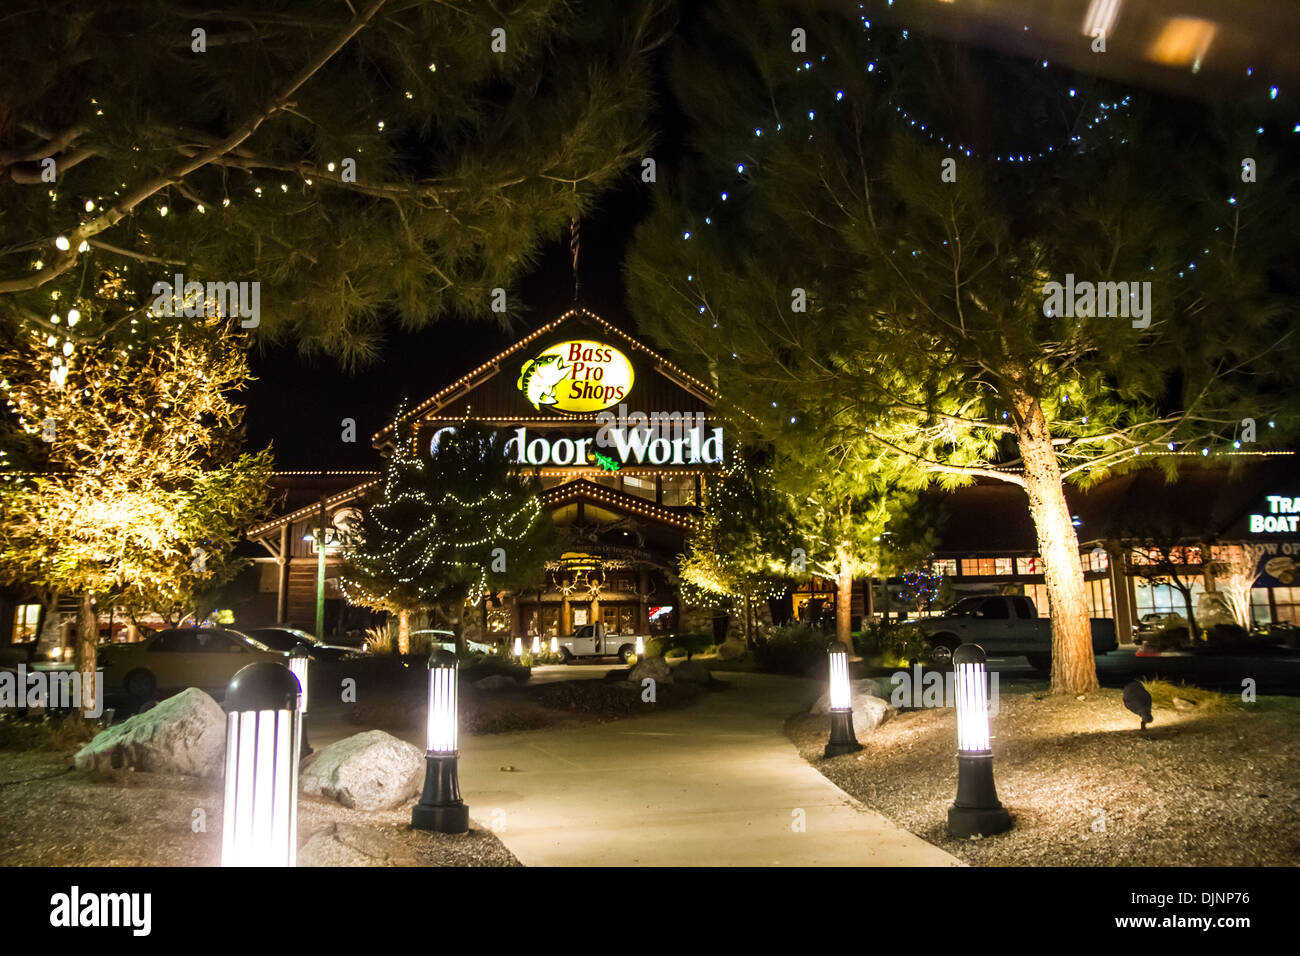 The Bass Pro Shops store in Rancho Cucamonga California at night